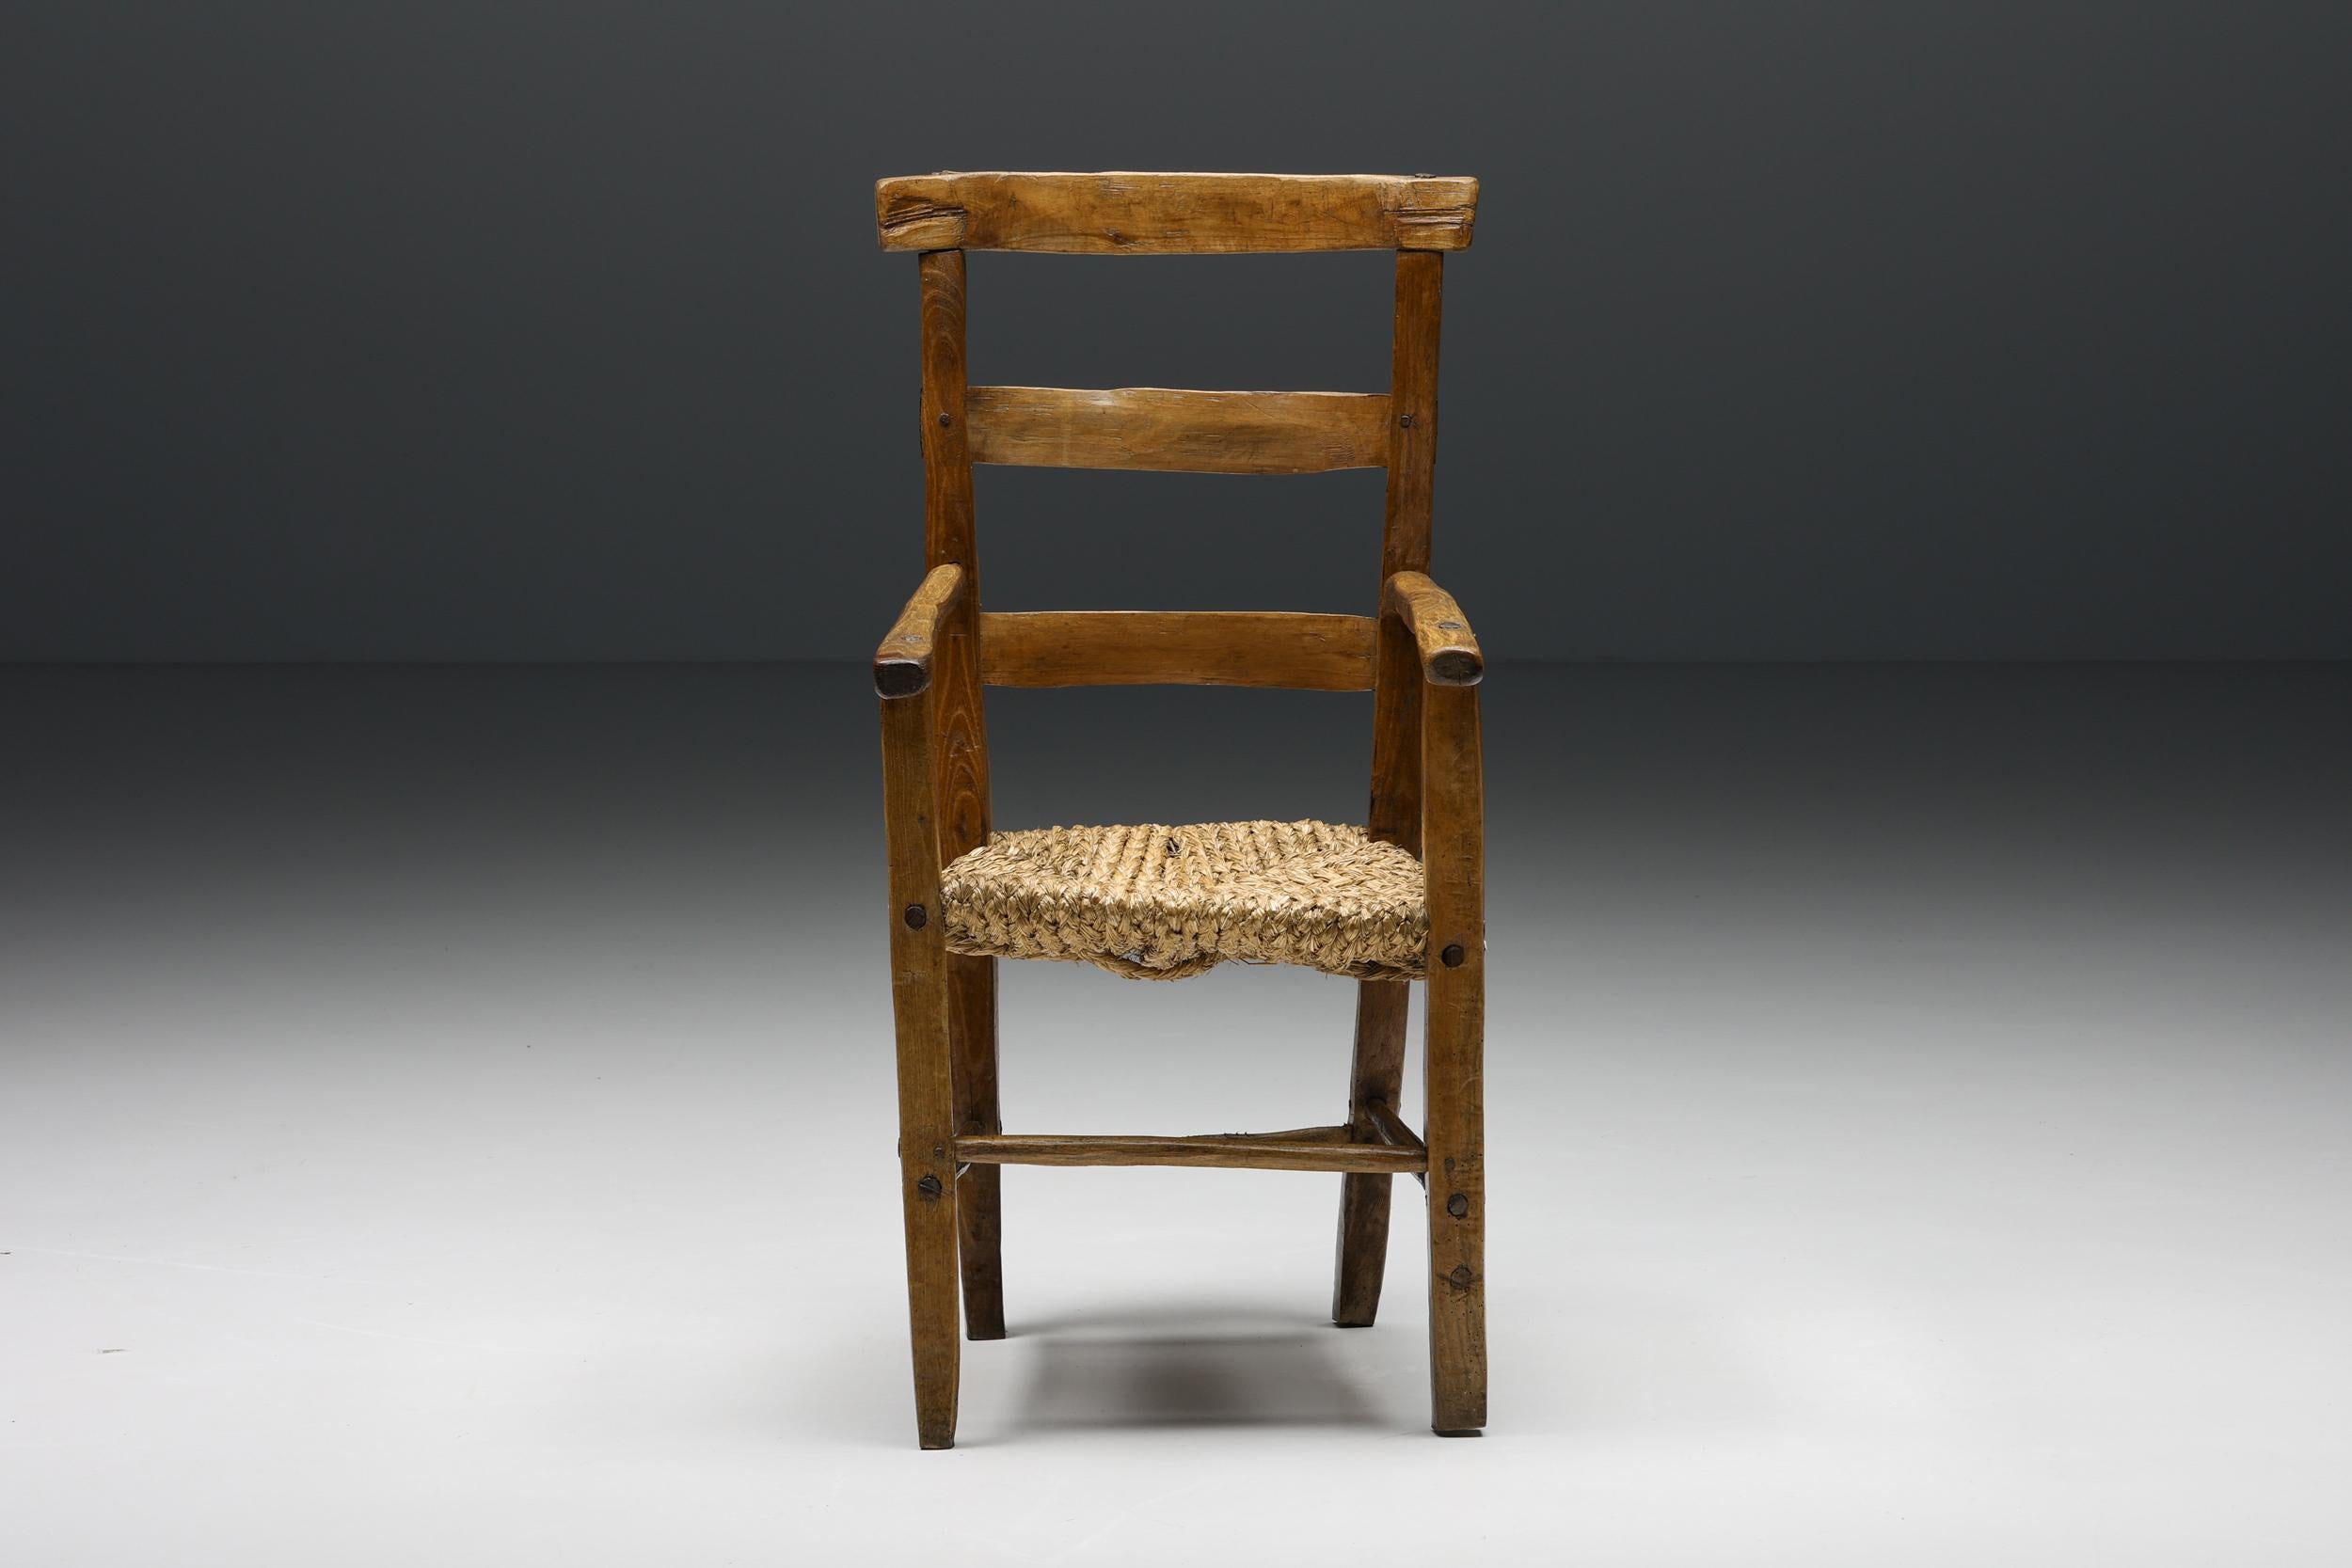 Wabi-Sabi Rustic Cord Arm Chair, French craftsmanship, 1940's

Rustic armchair with comfortable cord seating and an imperfect, wabi-sabi wooden structure. A remarkable example of French craftsmanship. This chair would fit well in a Mid-Century